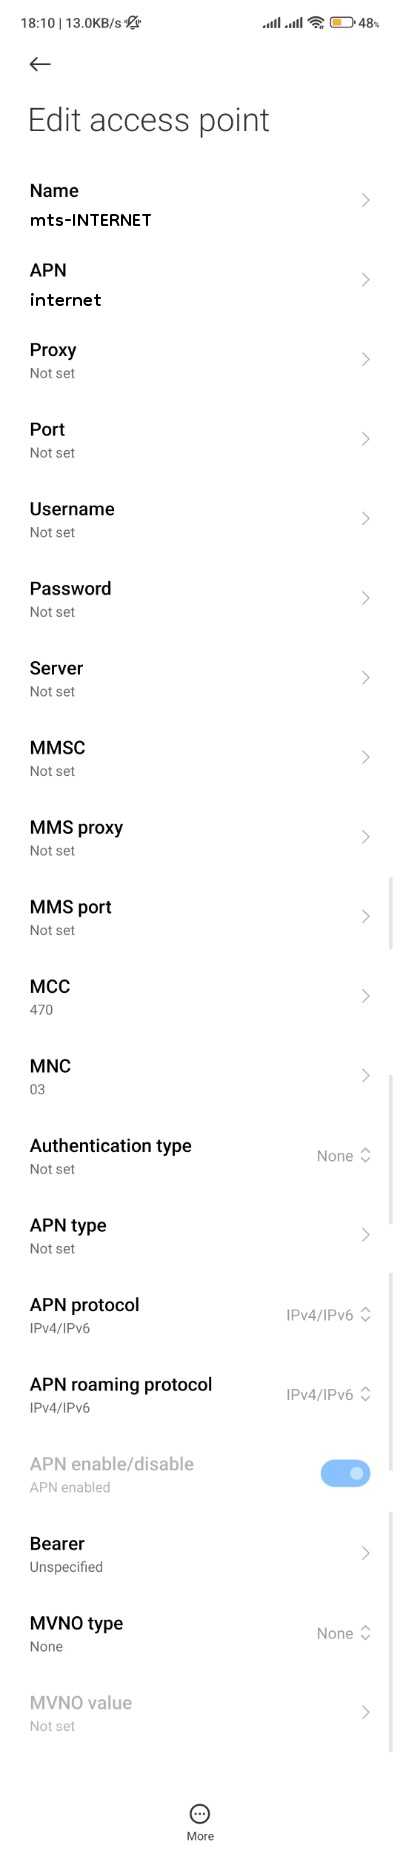 mts Serbia APN Setiings for Android iPhone 3G 4G Internet